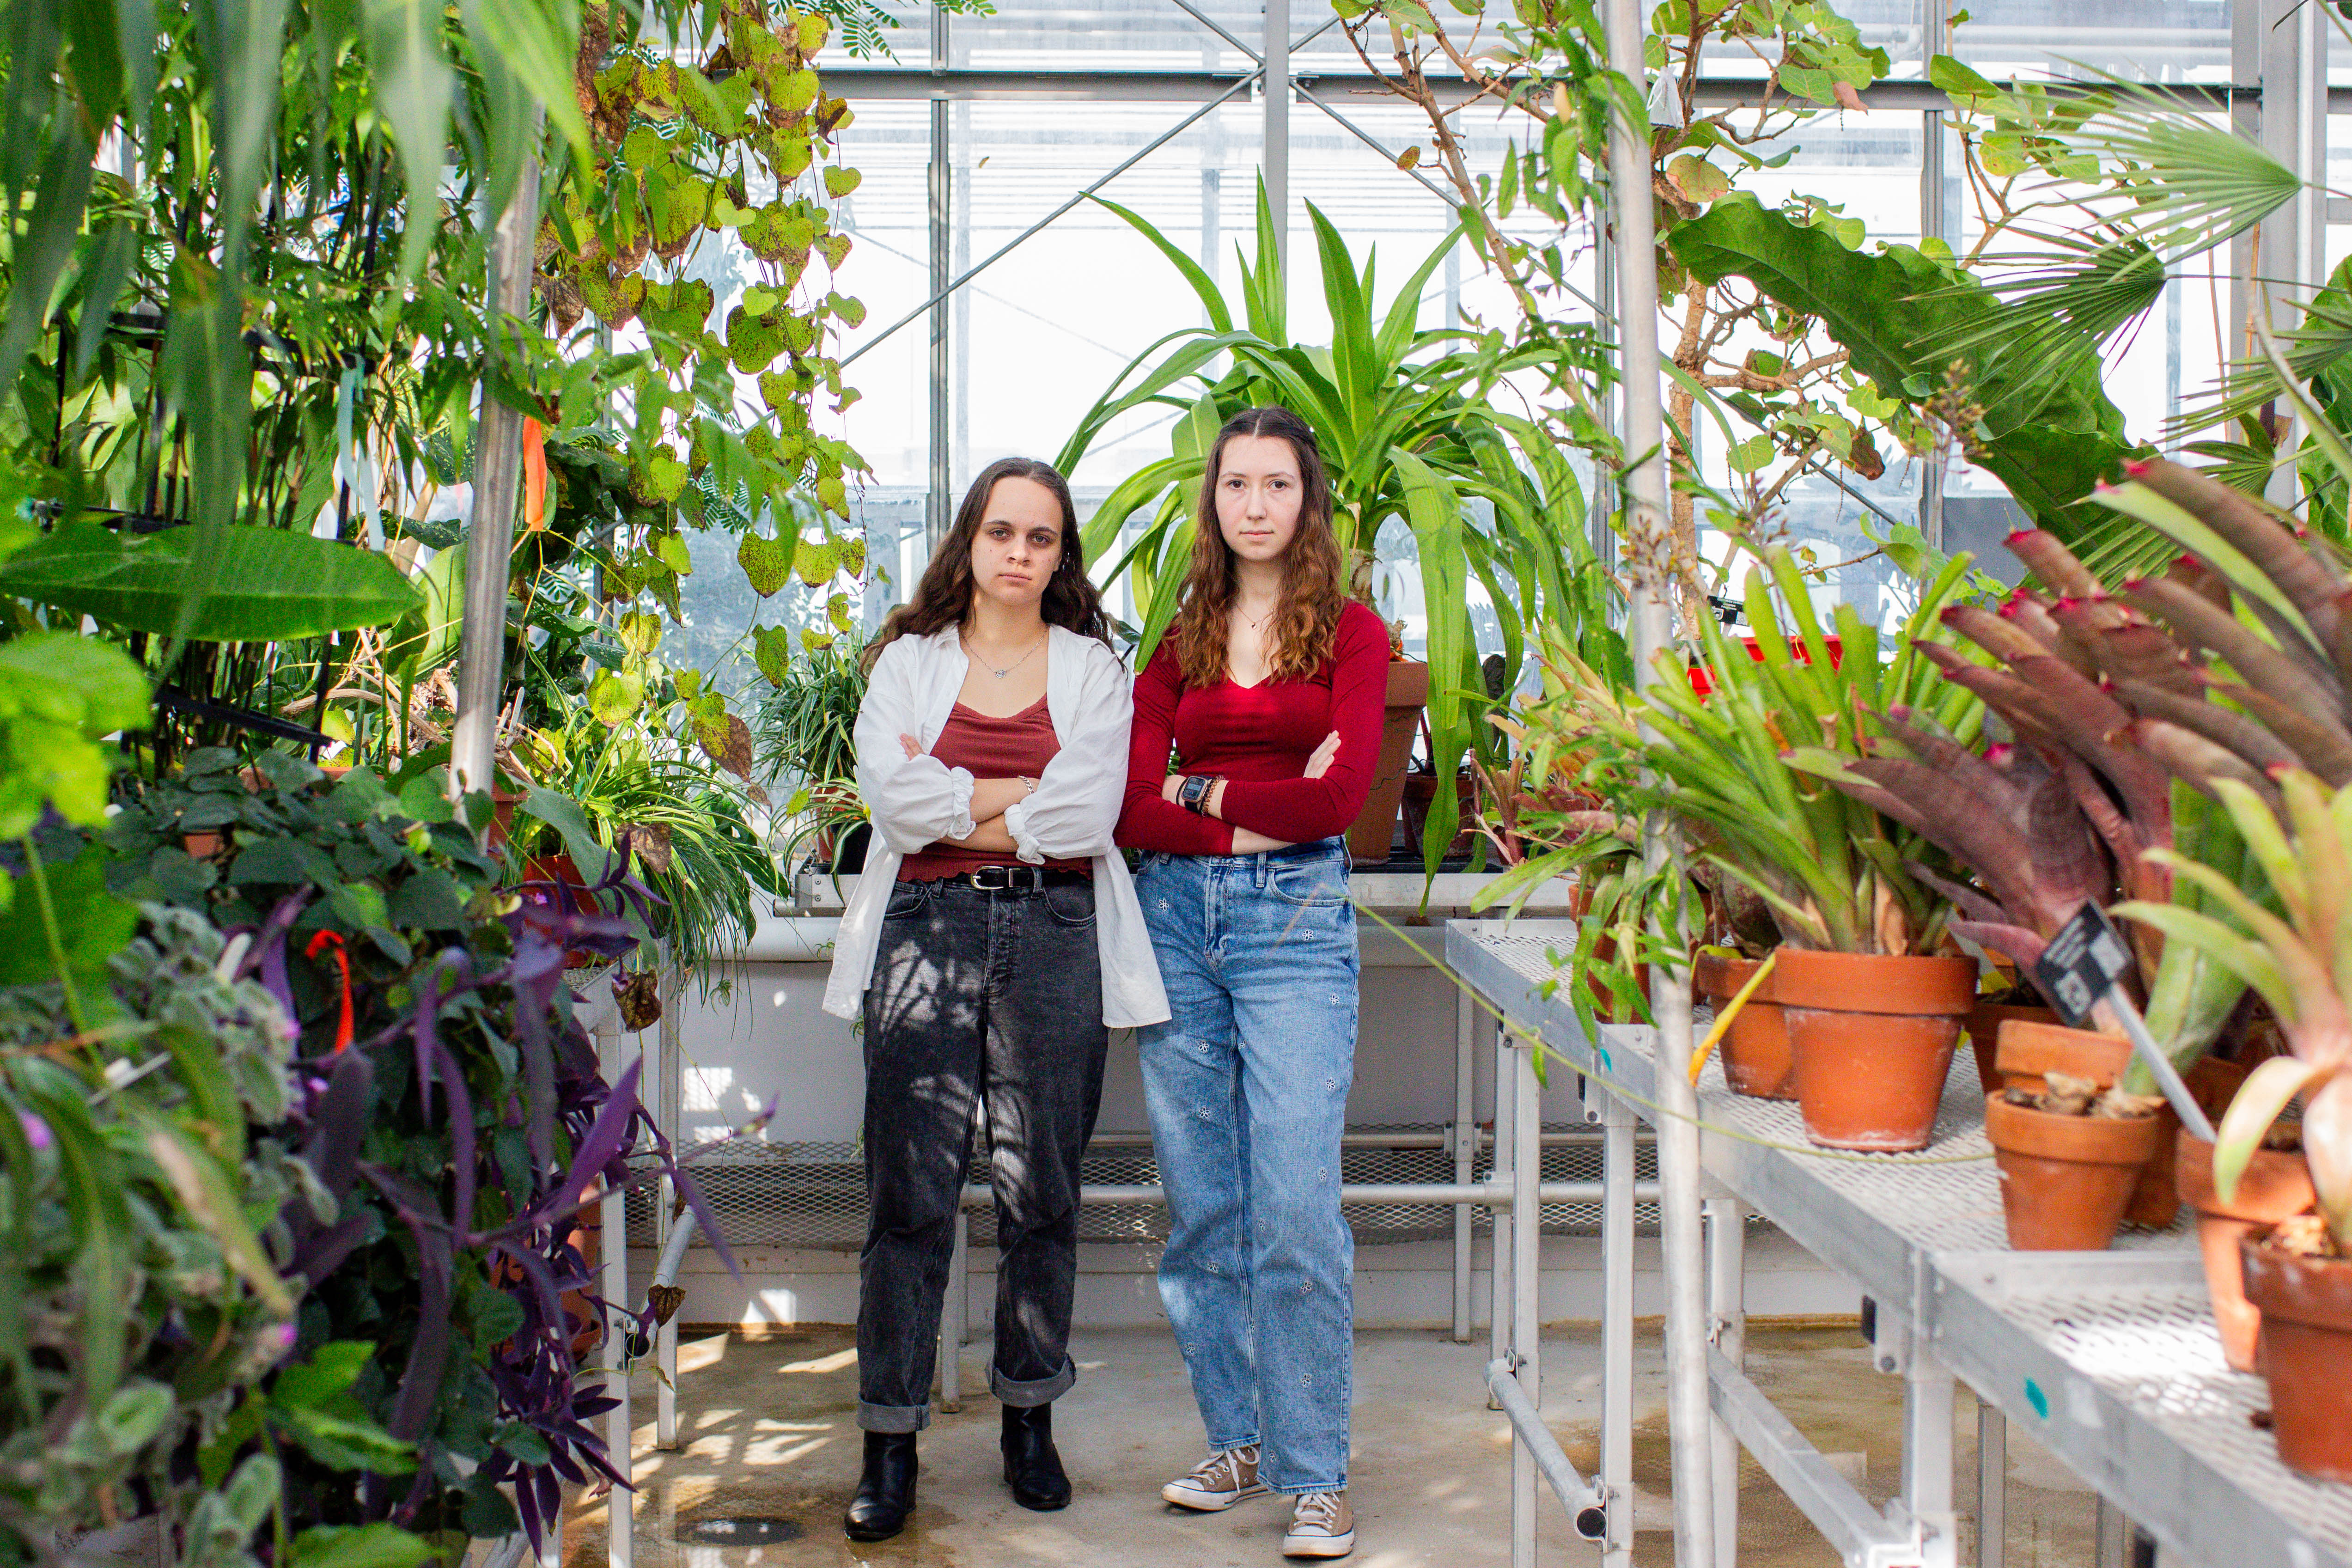 Neuroscience major Megan Fleeharty ‘24 (left) and biology and environmental science major Olivia Cunningham ’25 (right) share the same goal: to see their work expand beyond the lab and experience real-world impacts. (Photo by Tess Willett)